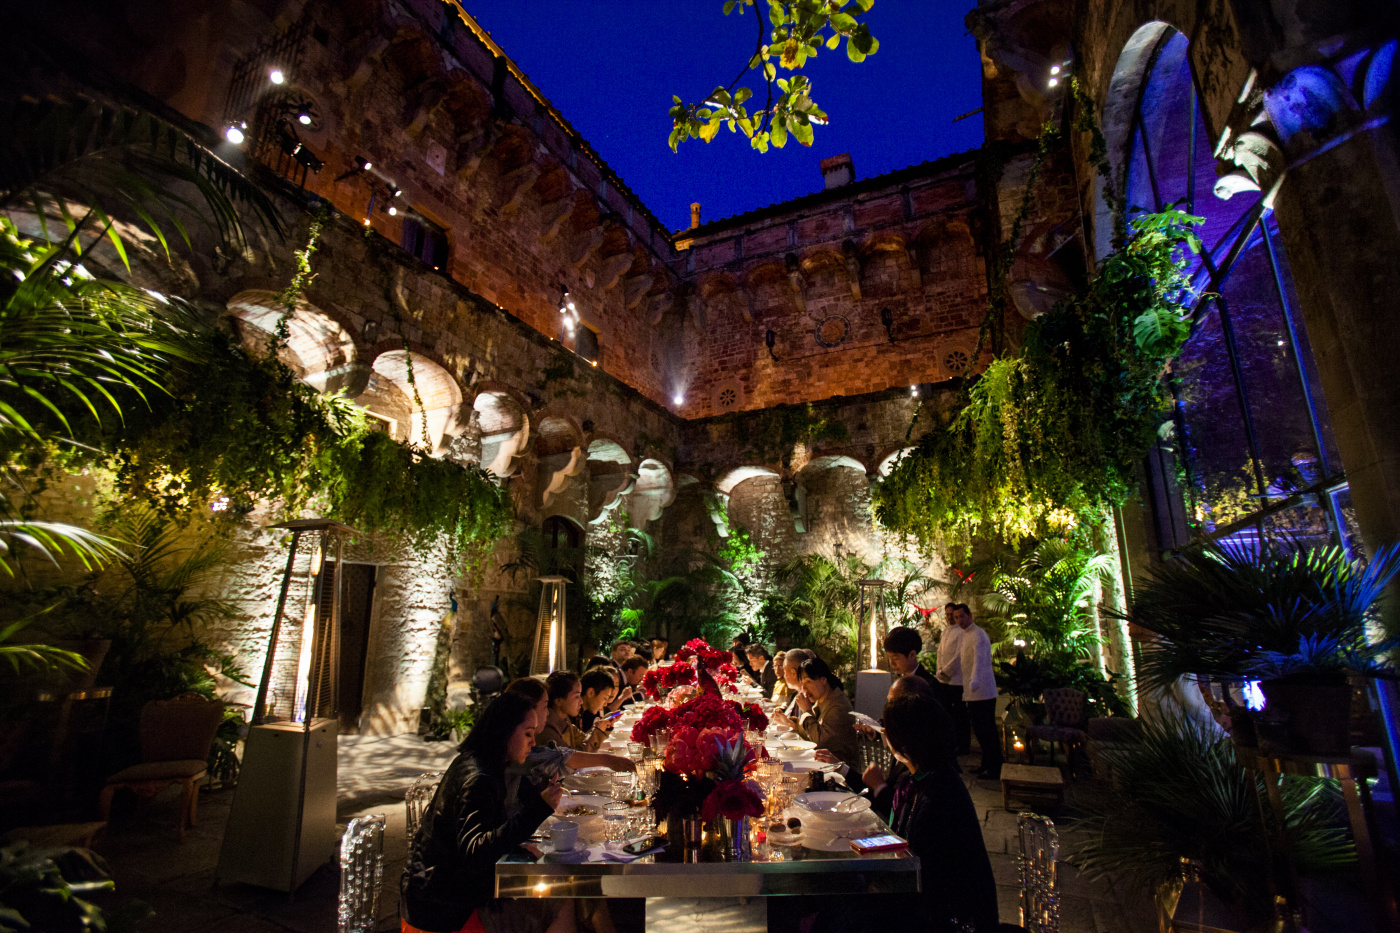 Castle courtyard with hanging greenery and lights